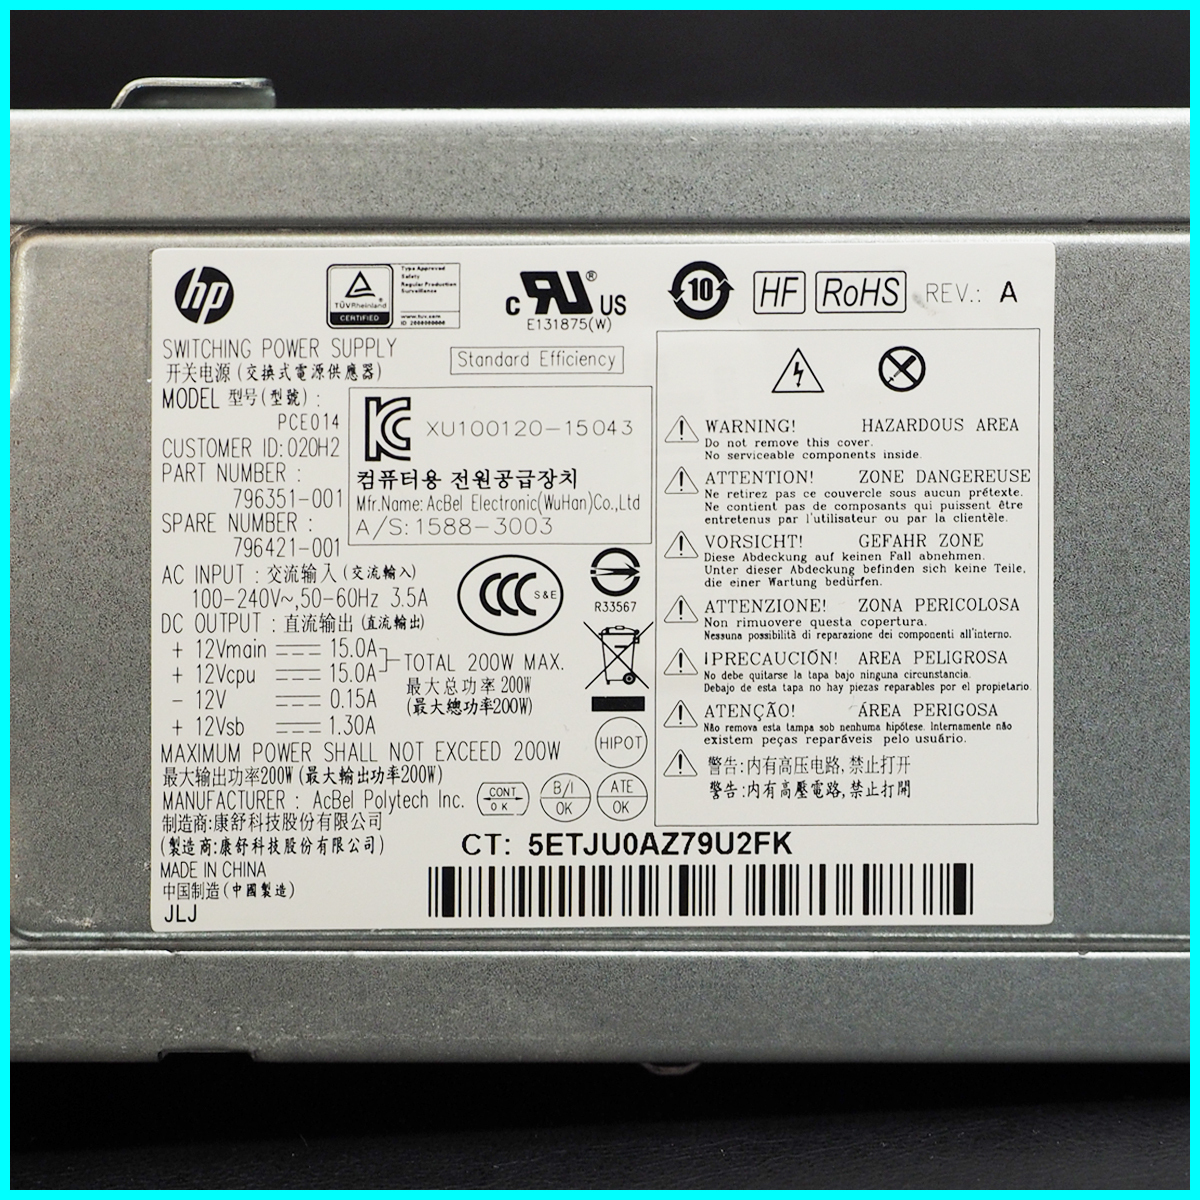 HP ProDesk 600 G2 SF power supply MODEL:PCE012 CUSTOMER ID:020H2 PART NUMBER:901914-004 REV:A AcBel 200W